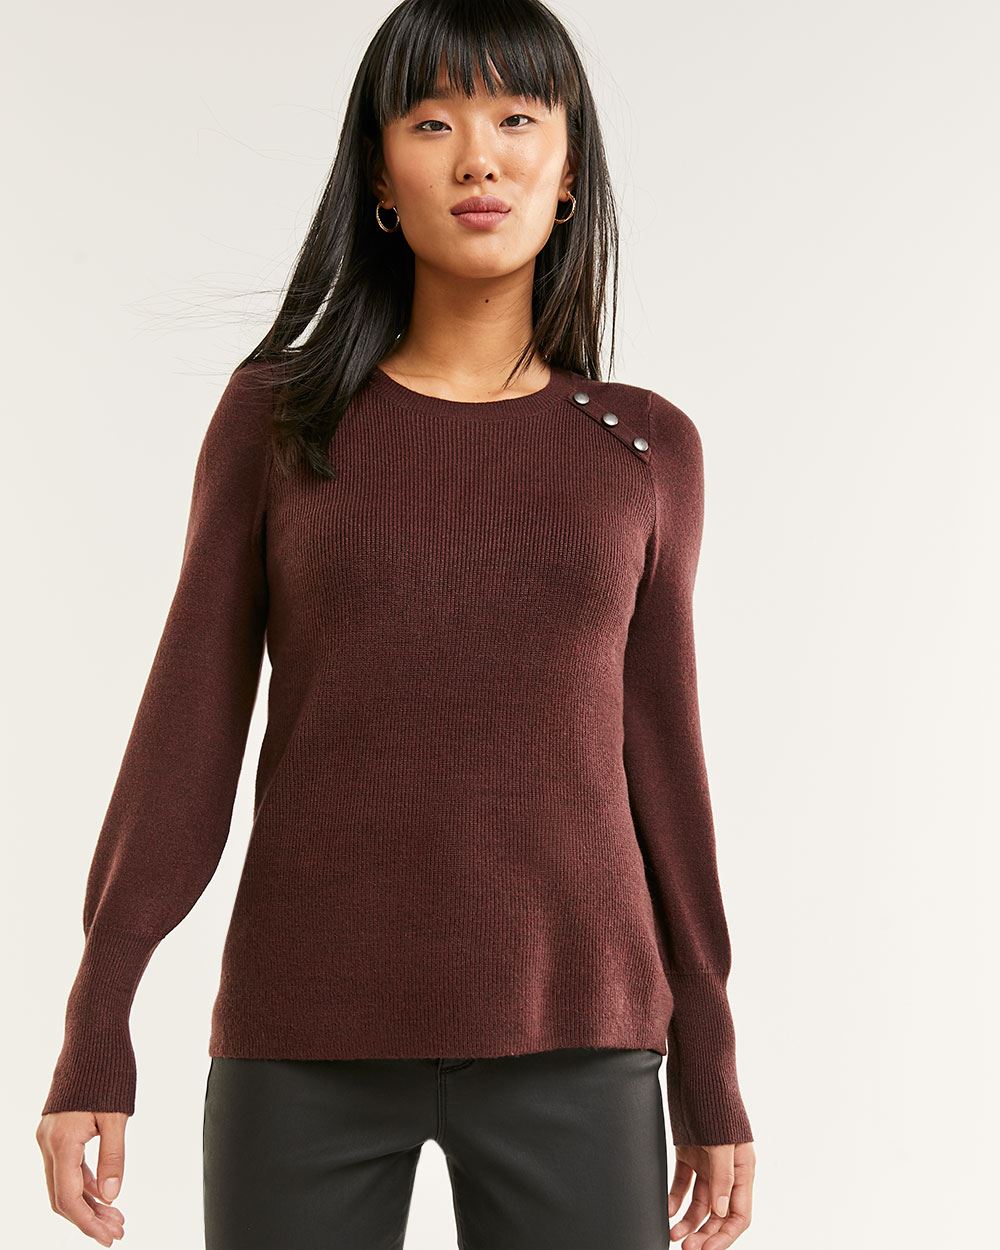 Long Sleeve Sweater with Decorative Buttons | Regular | Reitmans